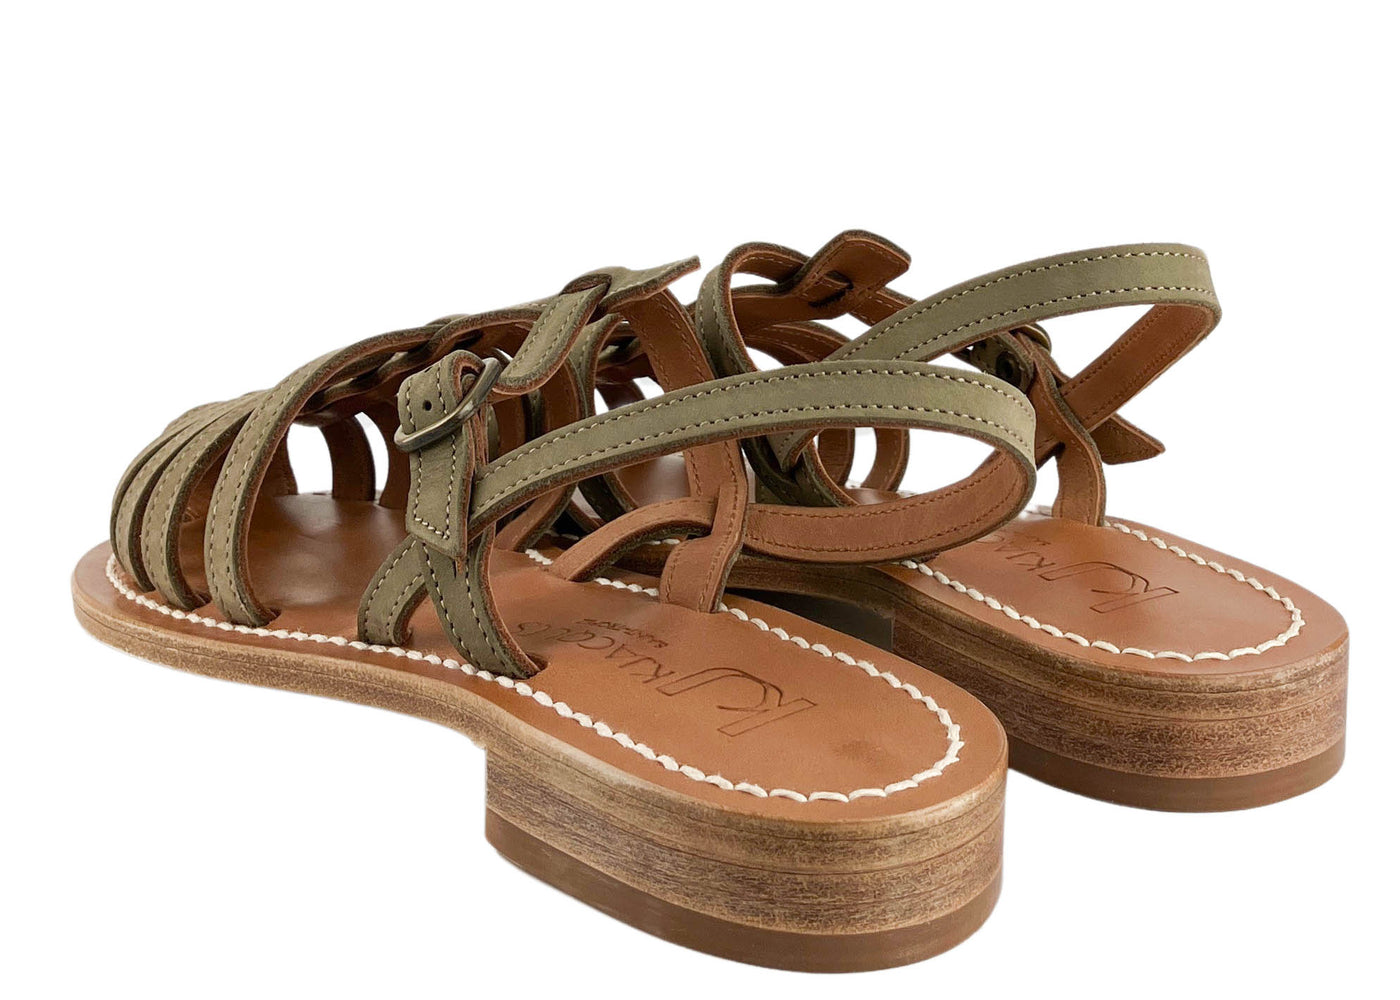 K.Jacques Aganka Sandals in Khaki - Discounts on K. Jacques at UAL